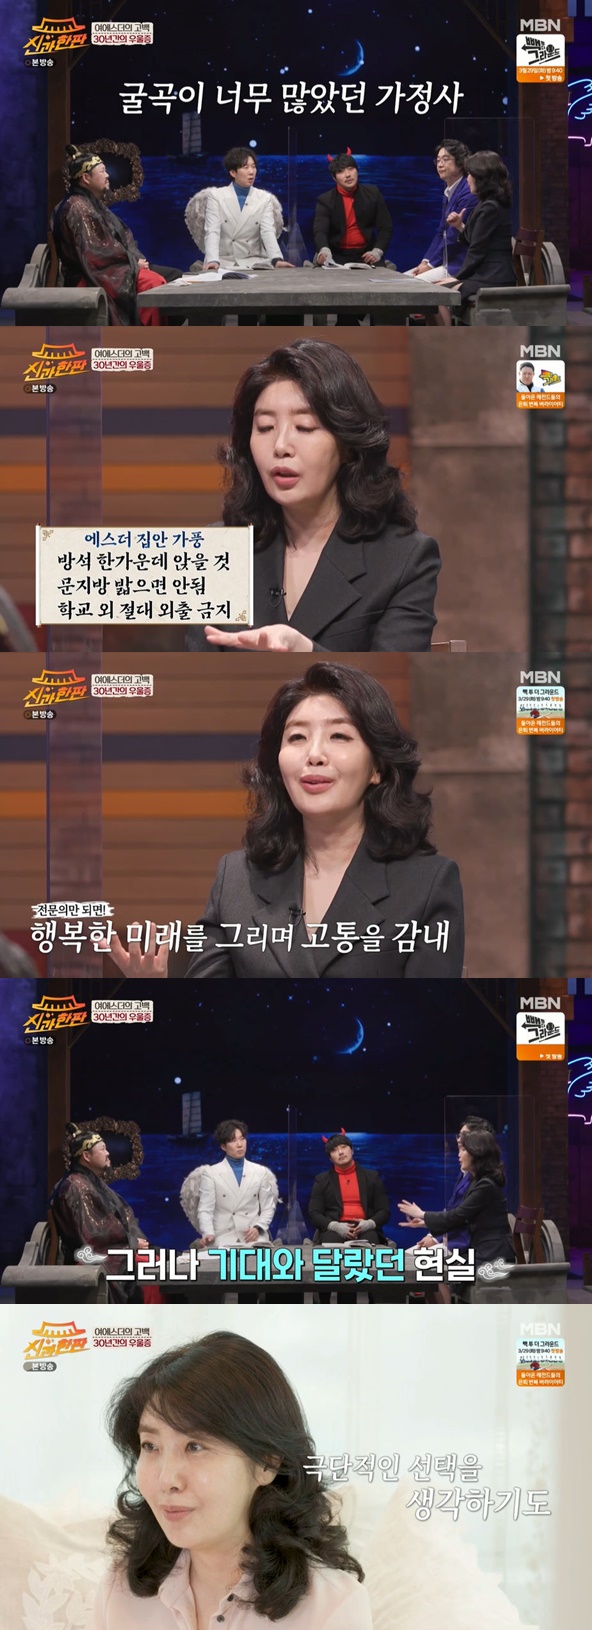 On the 25th MBN entertainment program God and the Blind, the doctor couple Yeo Esther and Hong Hye-geol appeared.On this day, Do Kyung-wan showed a show window couple keyword and I am sick. He said, I am rumored to be living with an urgent need.I was hired, he said, explaining rumors that Jang Yoon-jung and Show Window were married.Yeo Esther and Hong Hye-geol also refuted the showwindo couples theory.The reason why the doctor community is rumored to have divorced is because I showed the prospect of divorcing on the air, said Yeo Esther.Yeo Esther said, I have been living in each bed and each room for four to five years, and now I live separately. I live in Seoul and my husband live in Jeju Island. We are in a friendly indifference, he said. We have a love and trust in each other.I feel comfortable living while doing what I want to do, said Yeo Esther. I do not show any sensitivity.At the end of the broadcast, the real reason for their separate lives was revealed, as Yeo Esther suffered from extreme depression.Depression has a natural temperament, and when environmental factors are added, it will develop, he said. I have suffered from a curved family history and have received Confucian education at home.Others had to write calligraphy when watching TV; there were strict rules, such as being banned from going out or not being abused by others. I couldnt unravel it in the accumulation of anger, Yeo Esther said.Earlier, Yeo Esther said his grandfather was a big business figure in Deagu, which was close enough to visit his home when former President Park Chung-hee visited Deagu.But political retaliation has led to his family being ordered to deport.I studied hard, dreaming of a happy future, he said. I became a specialist, but the reality was different from expectations. I was just an old maid.I got better thanks to my husband, said Hong Hye-geol, who laughed at the Yeo Esther, who turned the ball.Yeo Esther said, I lived without a mind because I was going to raise a child, but all the children became adults. My sister, who was like a friend, died and a severe depression came.It was the driving force of my life to care for, raise and protect someone, he said.I have a lot of extreme thoughts, but I do not put them into practice, said Yeo Esther. I know the sadness of the family to be left behind.I started to separate because my appearance makes my husband difficult, he said.Photo = MBN broadcast screen